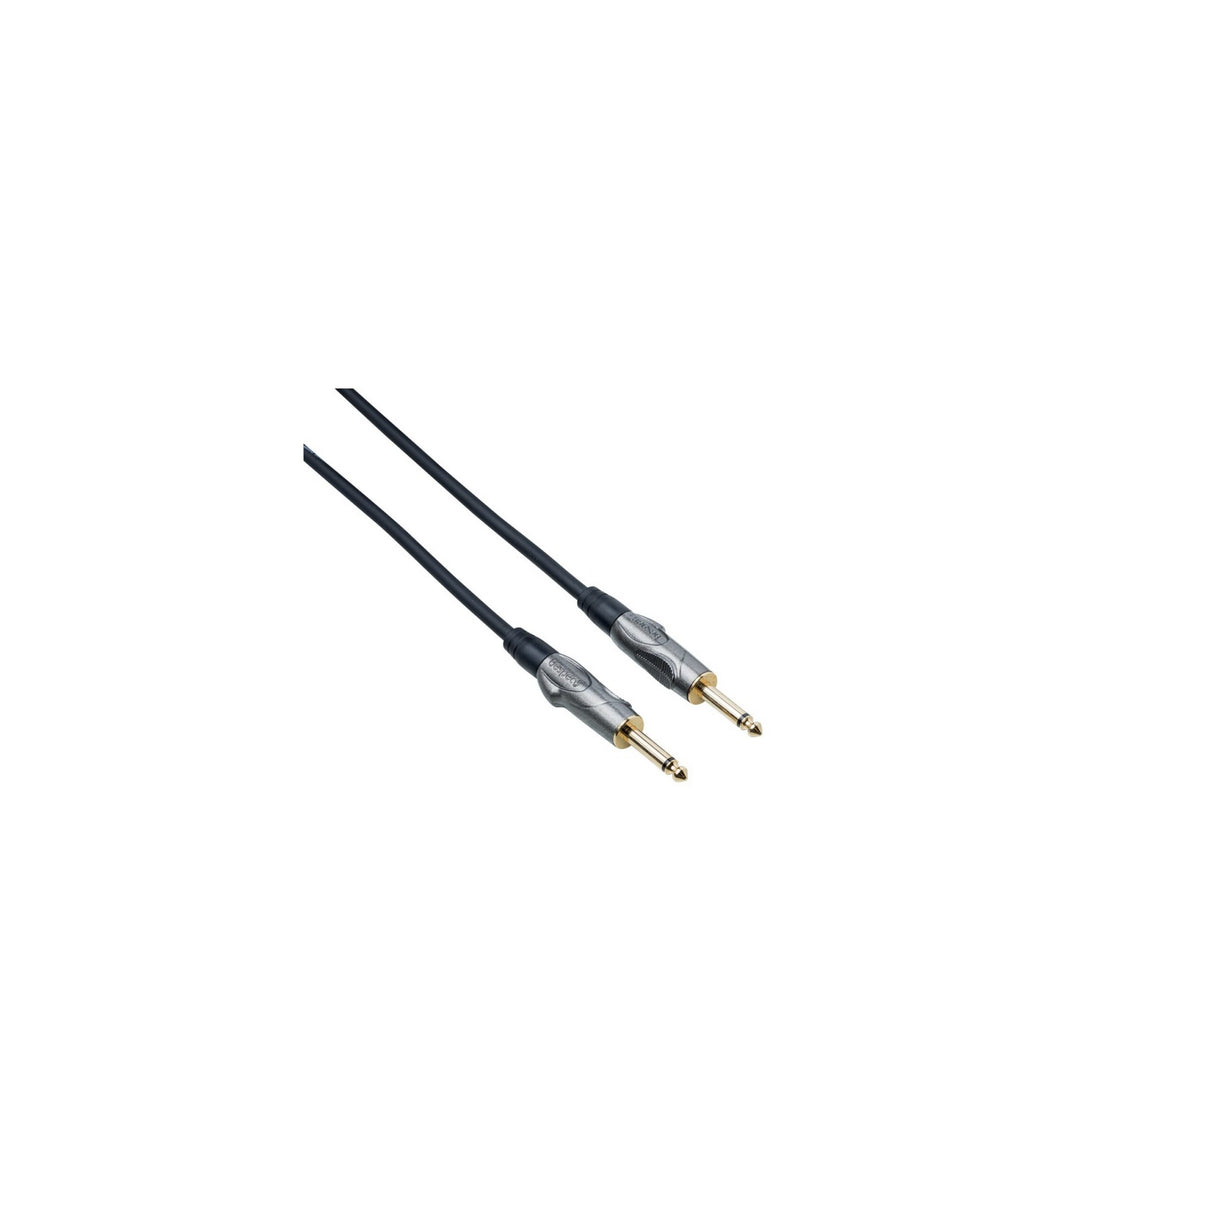 Bespeco TT600 Titanium Series Straight Angle 1/4 Inch to 1/4 Inch Guitar Cable, 20 Foot